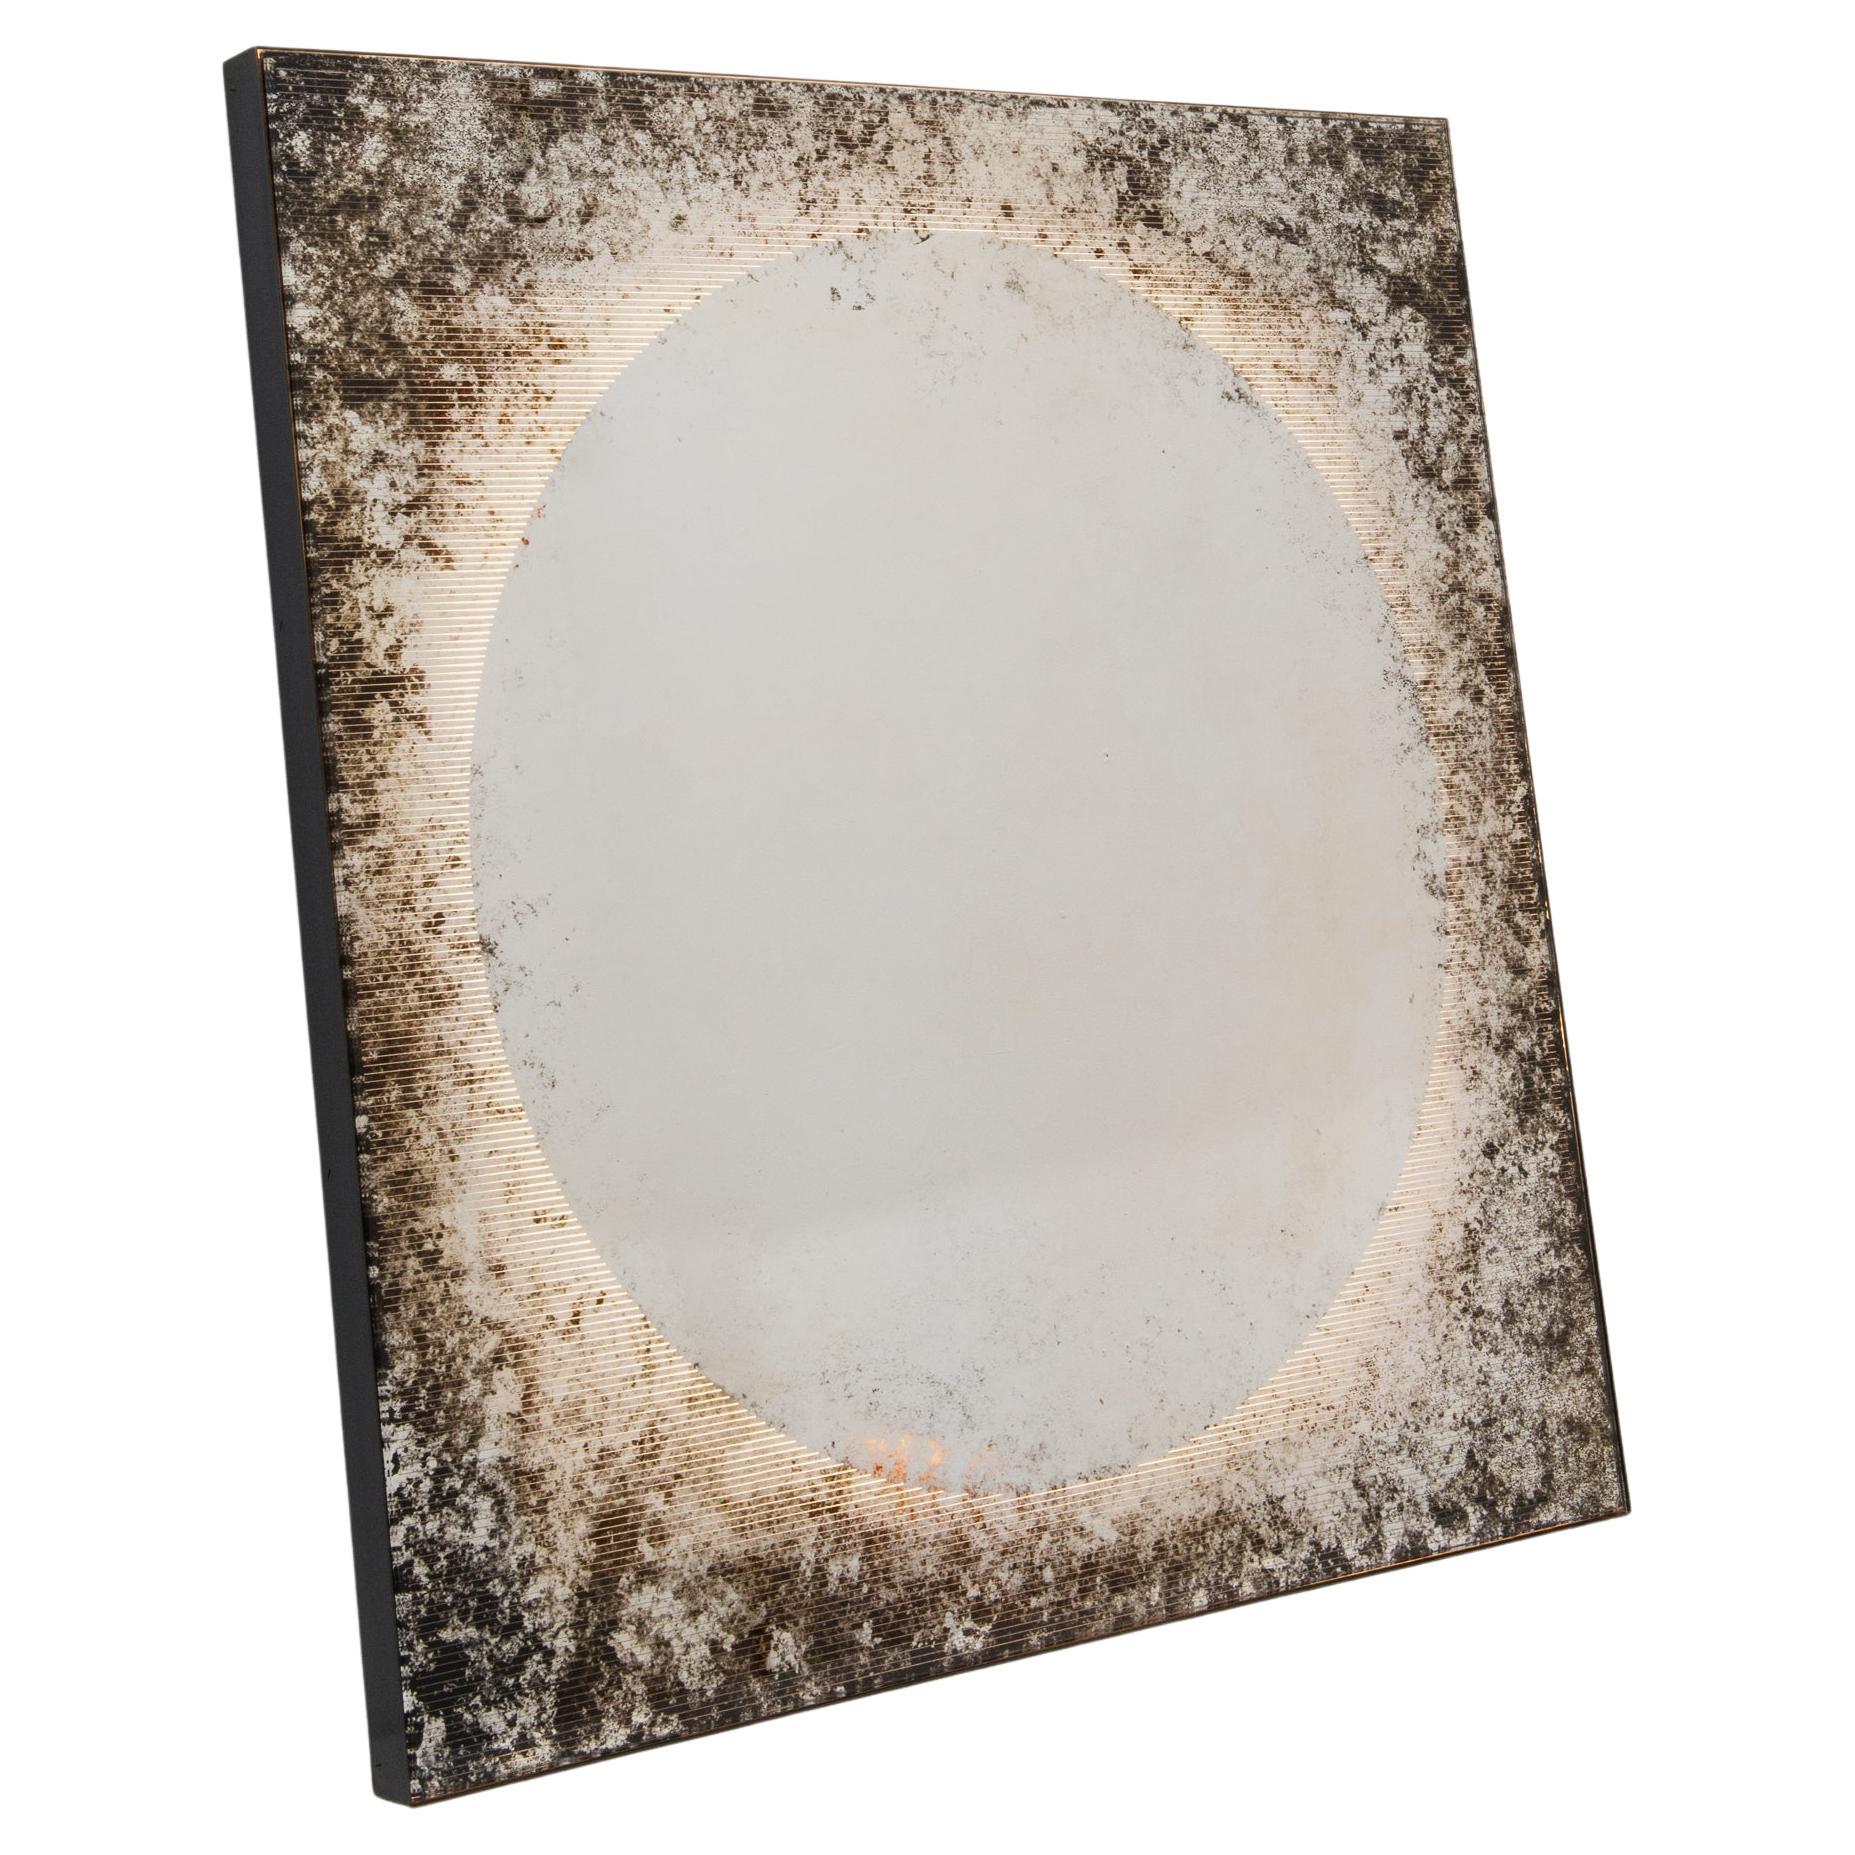 Horizon Antiqued Finely Etched Mirror, Back-Illuminated, Blackened Metal Frame For Sale